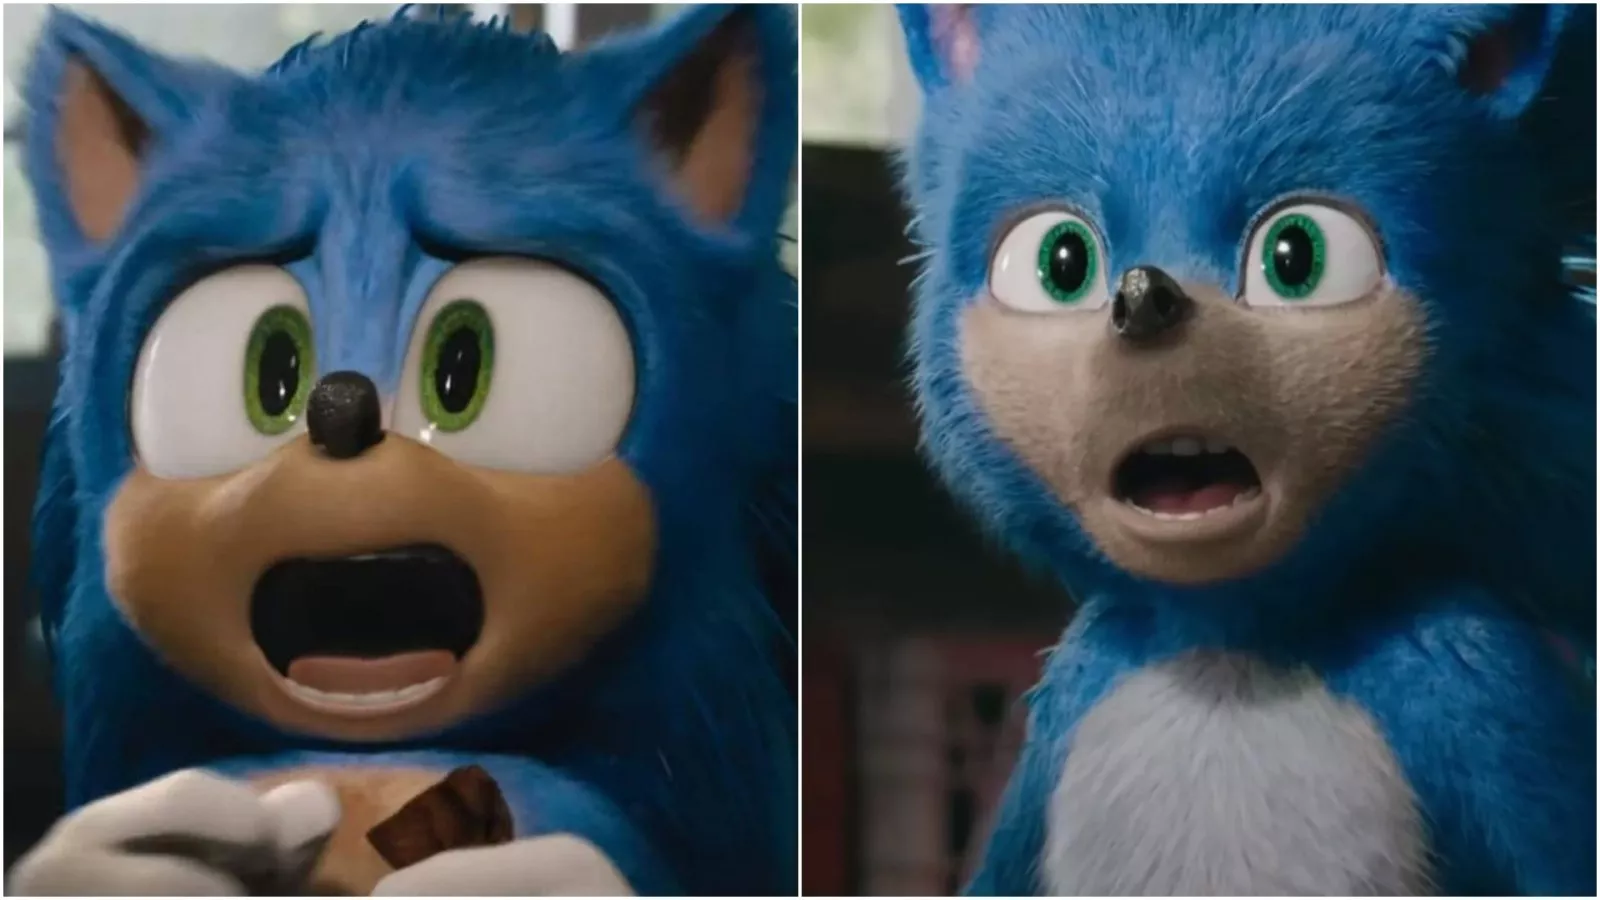 Sonic Movie Comparison: Here's The Old And New Designs Side-By